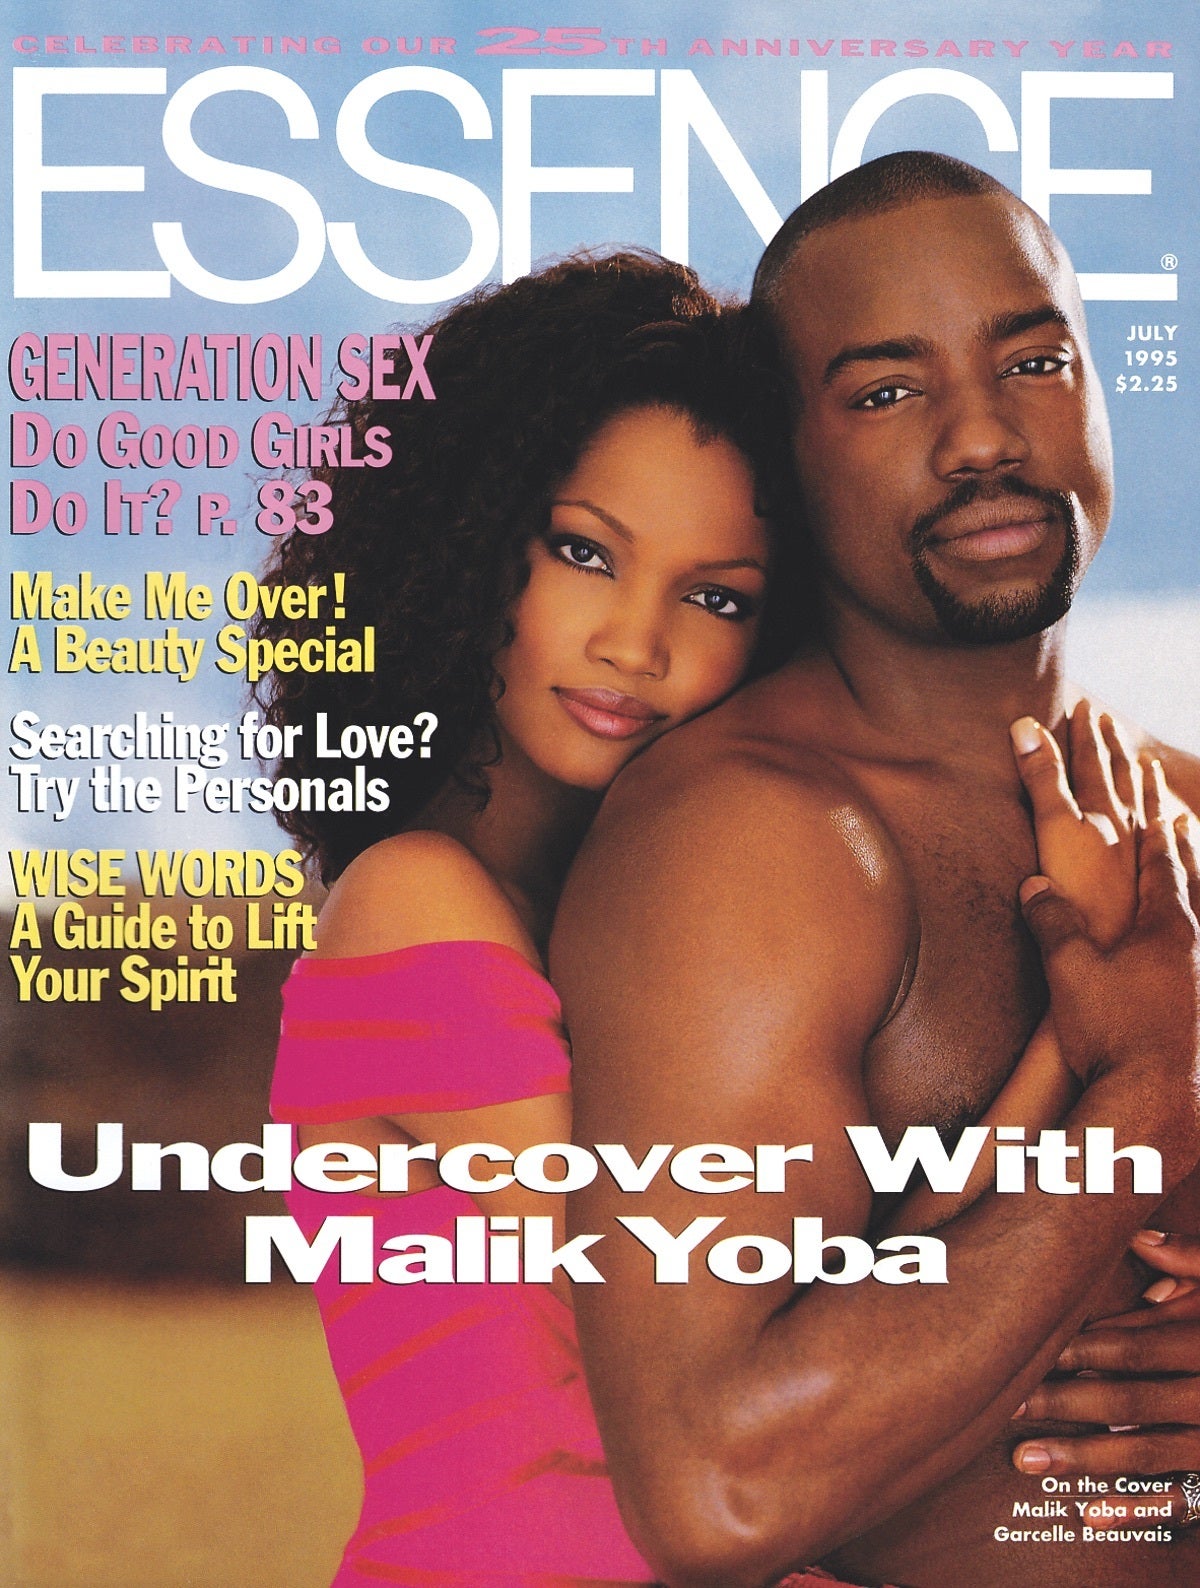 A Look At Members Of The Cast Of 'Coming 2 America' On The Cover Of Essence Over The Years